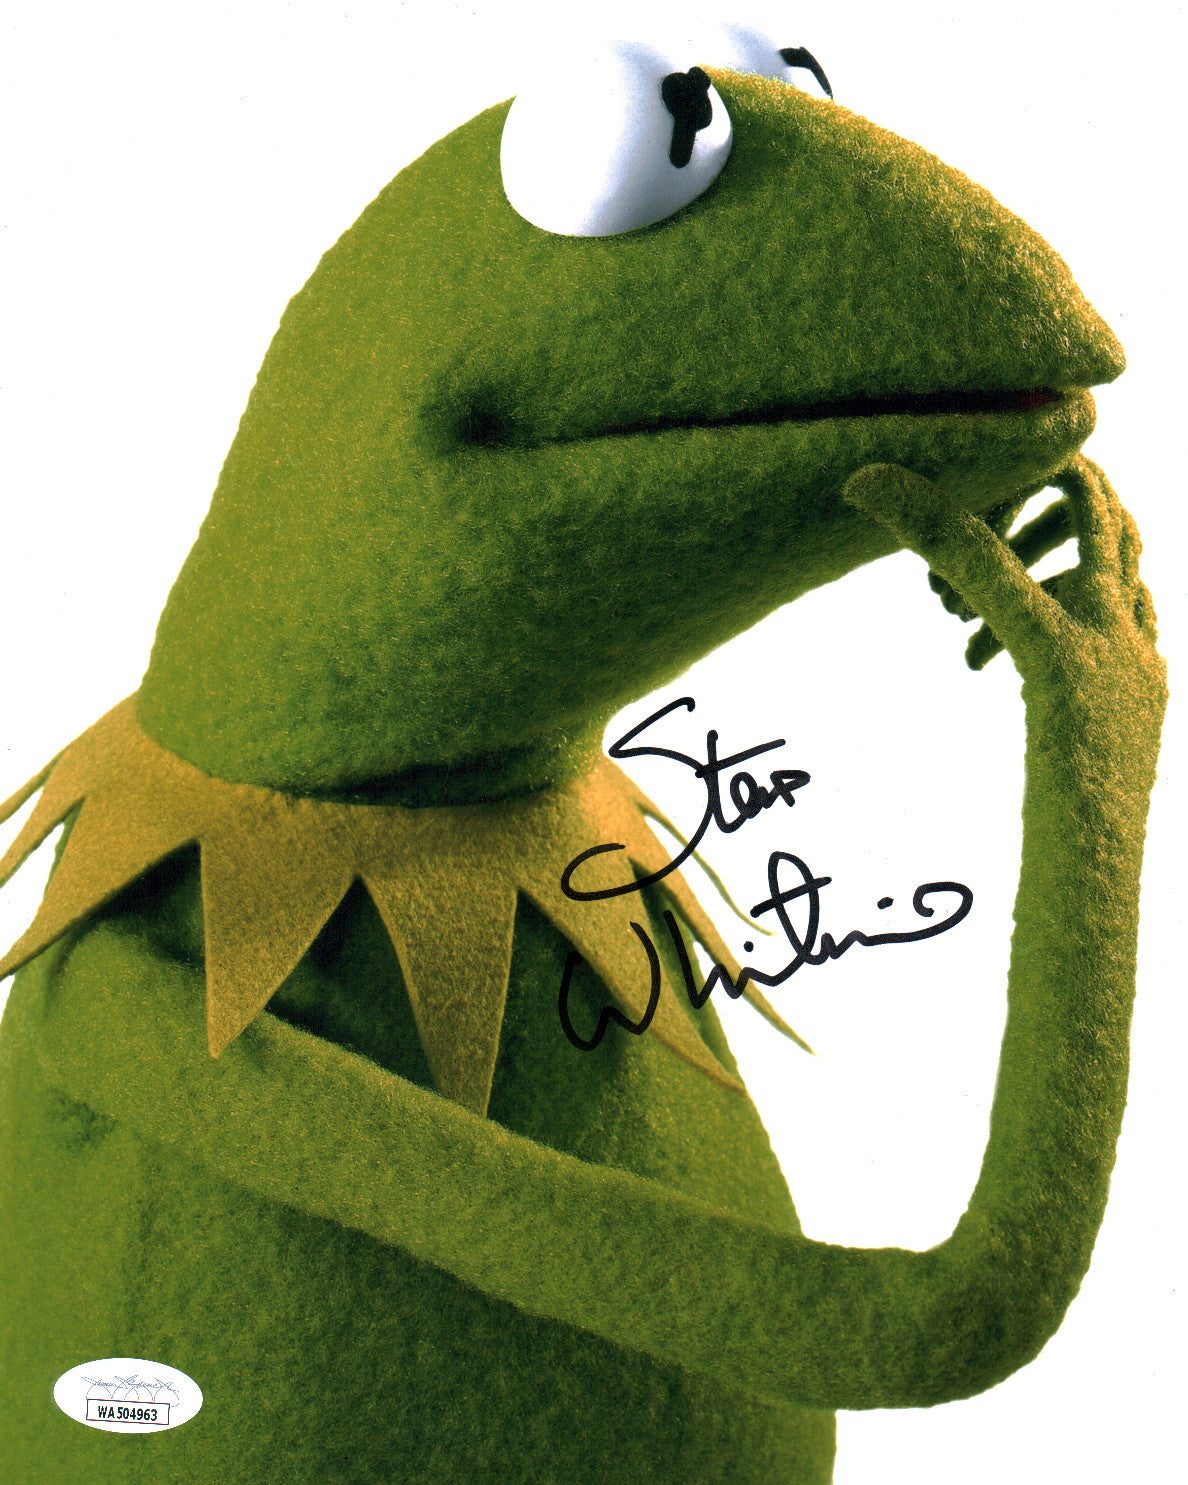 Steve Whitmire The Muppets 8x10 Signed Photo JSA Certified Autograph